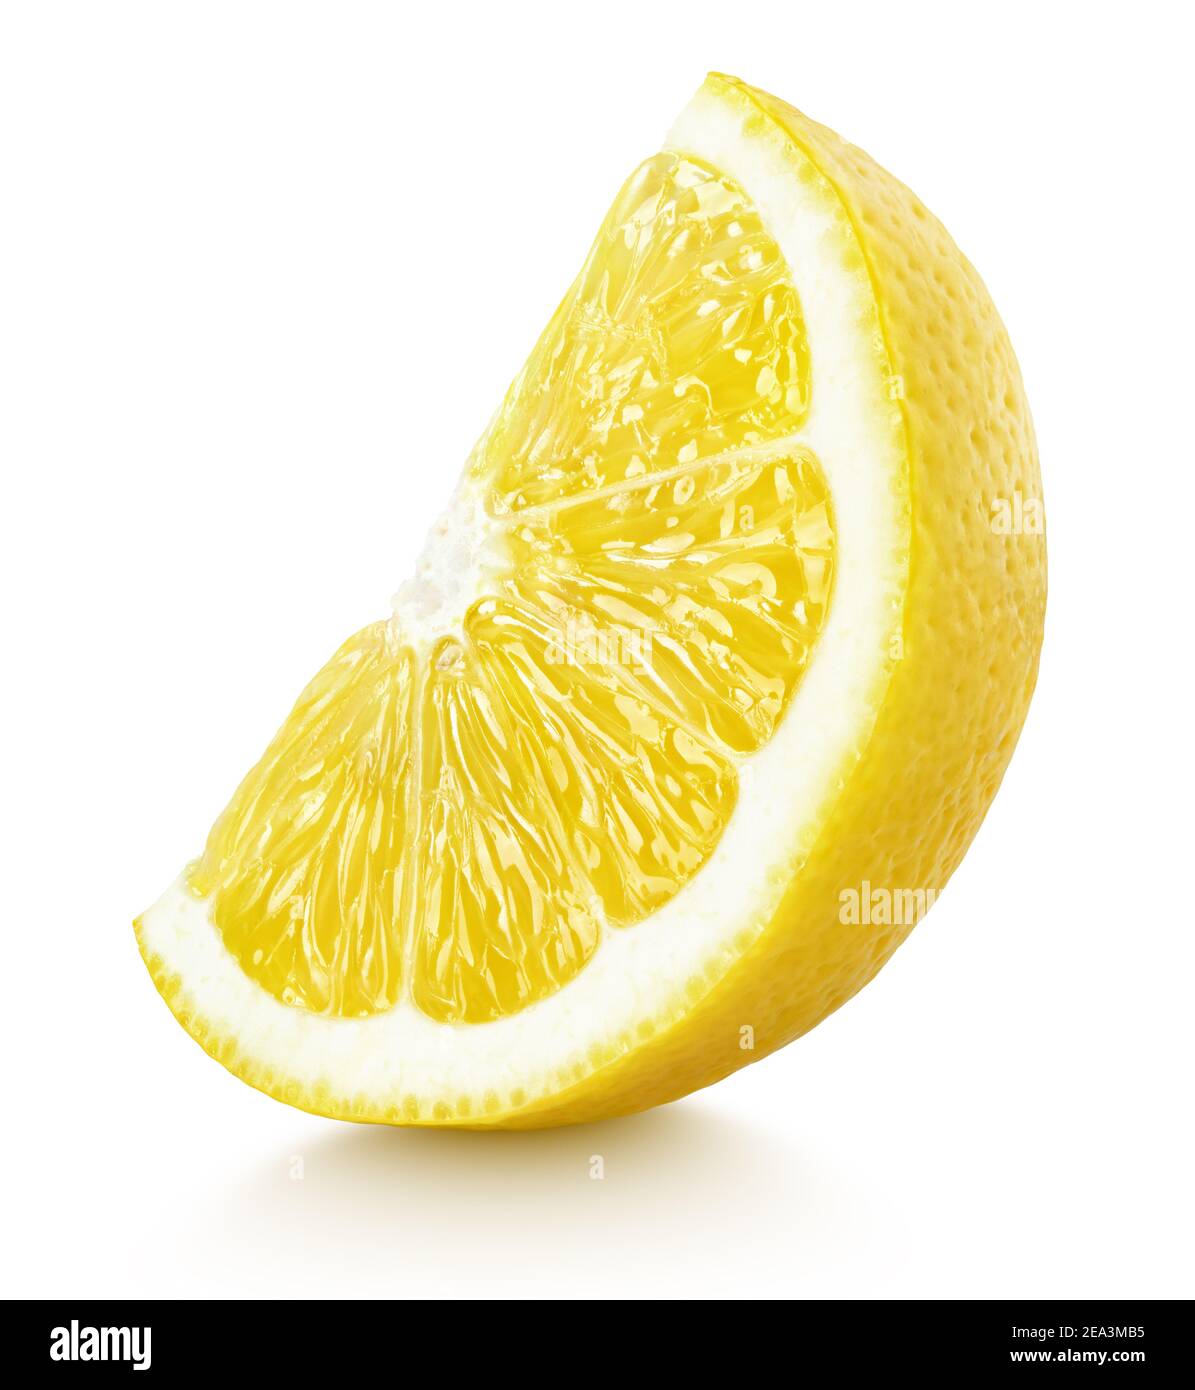 Ripe slice of yellow lemon citrus fruit stand isolated on white background with clipping path Stock Photo